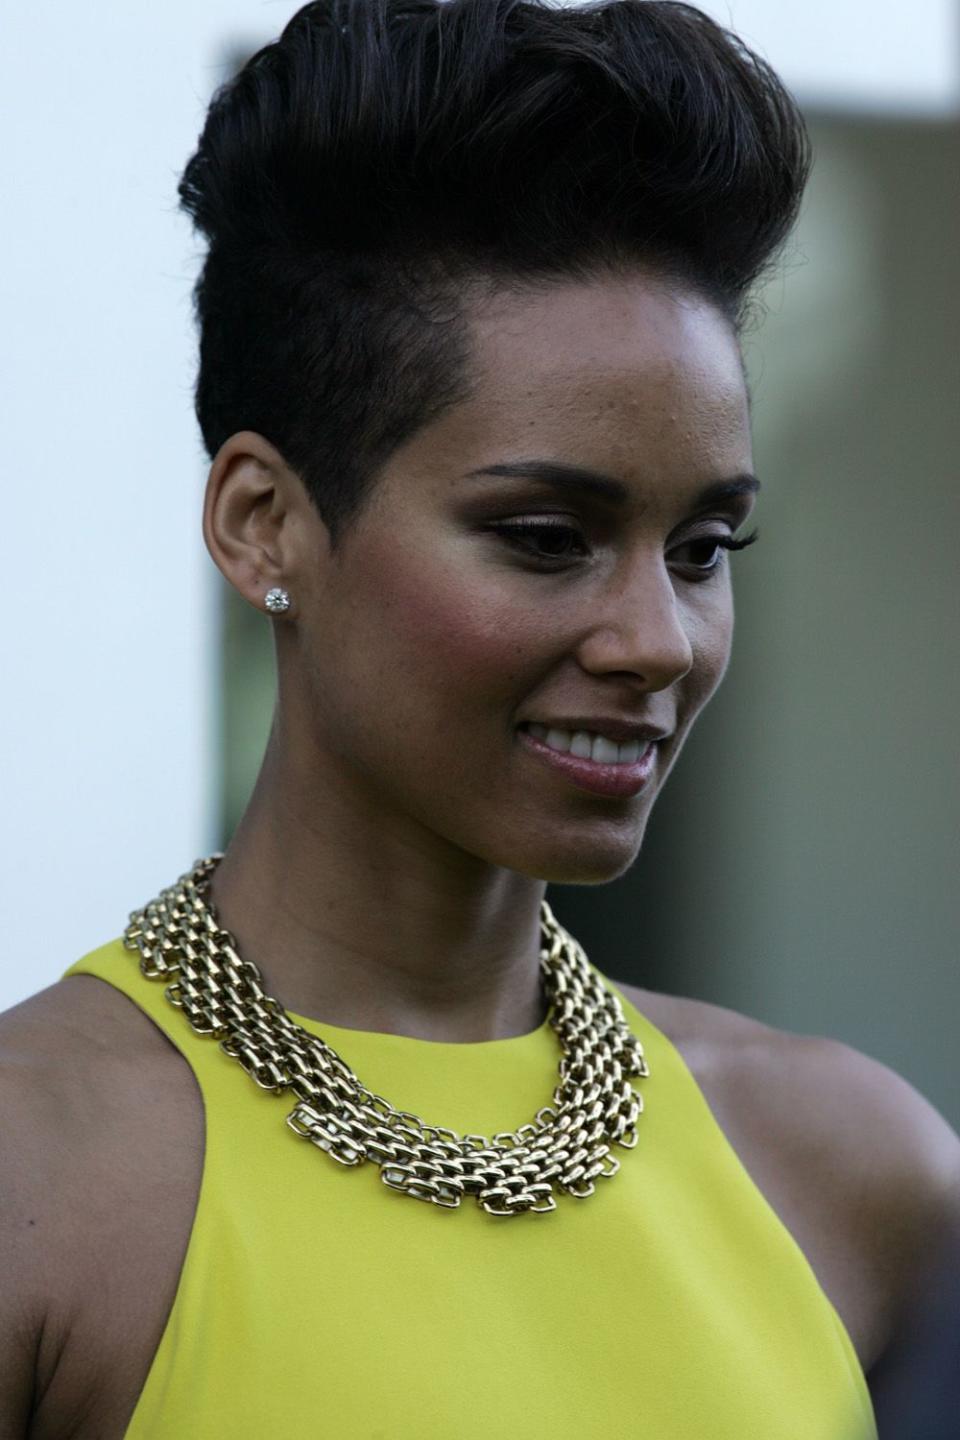 Age has nothing on Alicia Keys as she looks breath-taking in a long yellow dress/